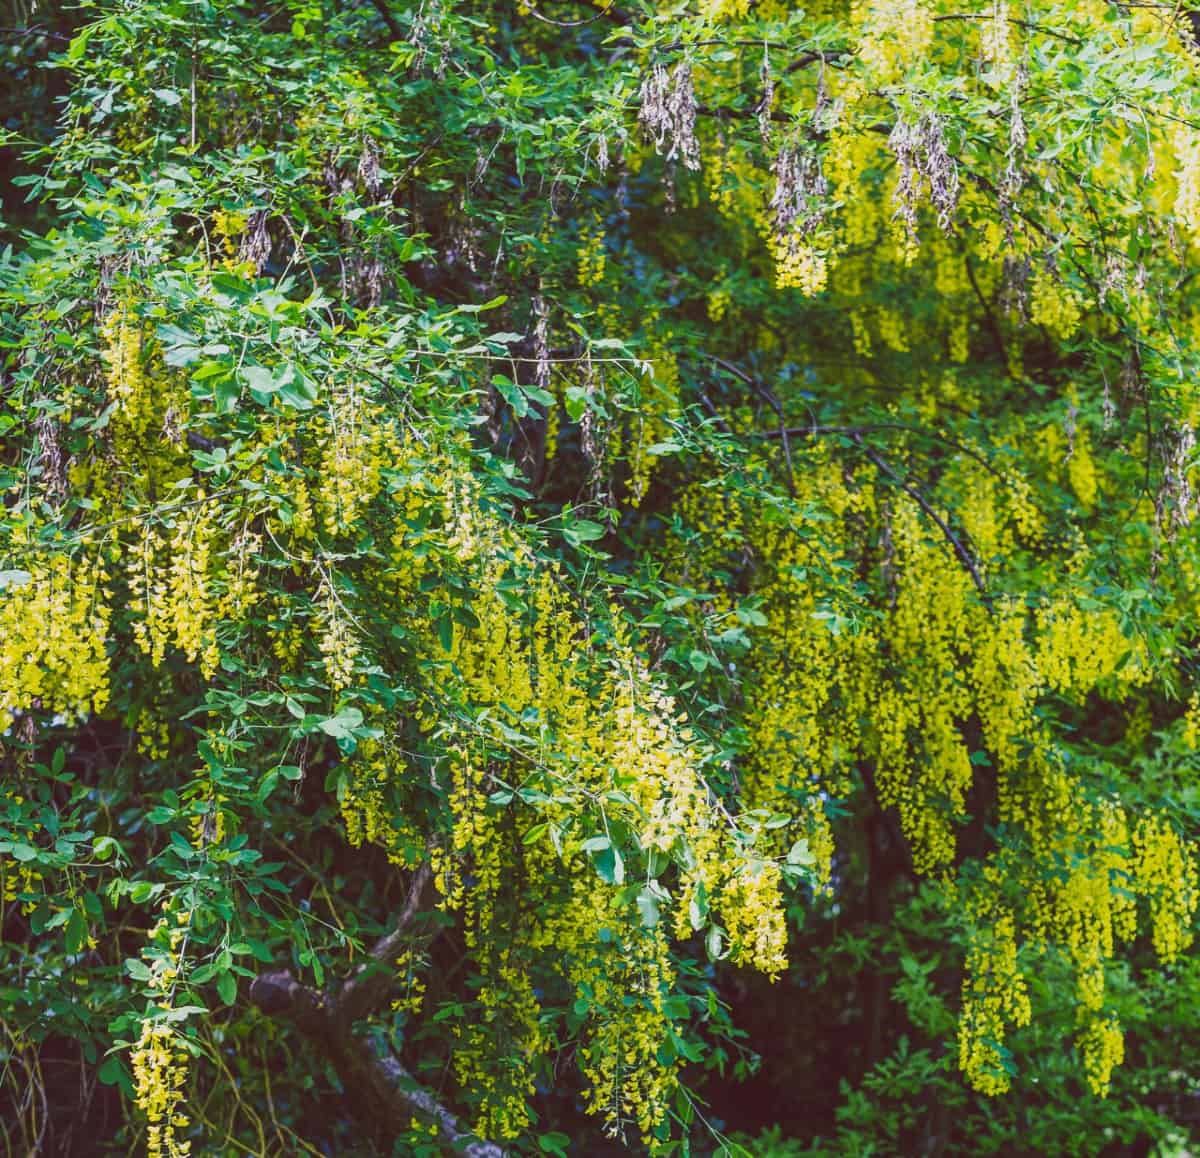 The golden chain tree has recognizable yellow flowers and green bark.